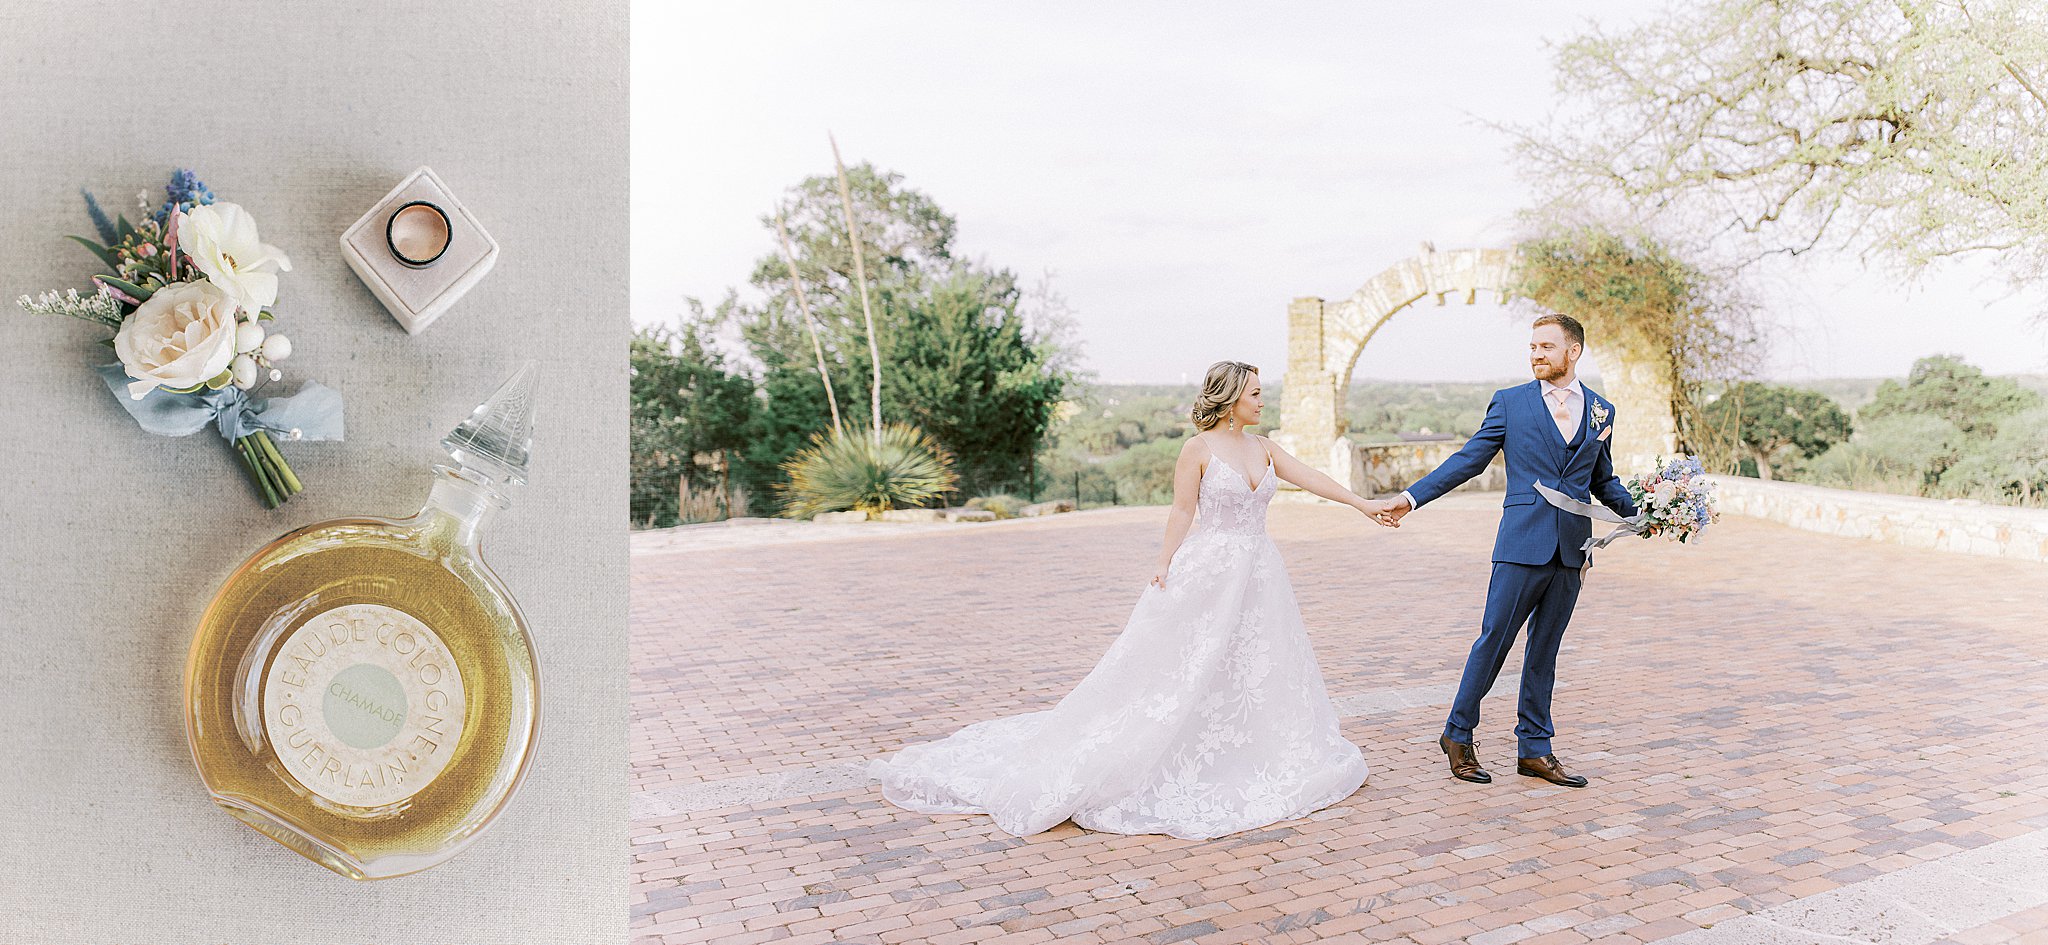 Beautiful bridal shot at Camp Lucy outdoor wedding venue in Austin, Texas with Chamade Guerlain cologne